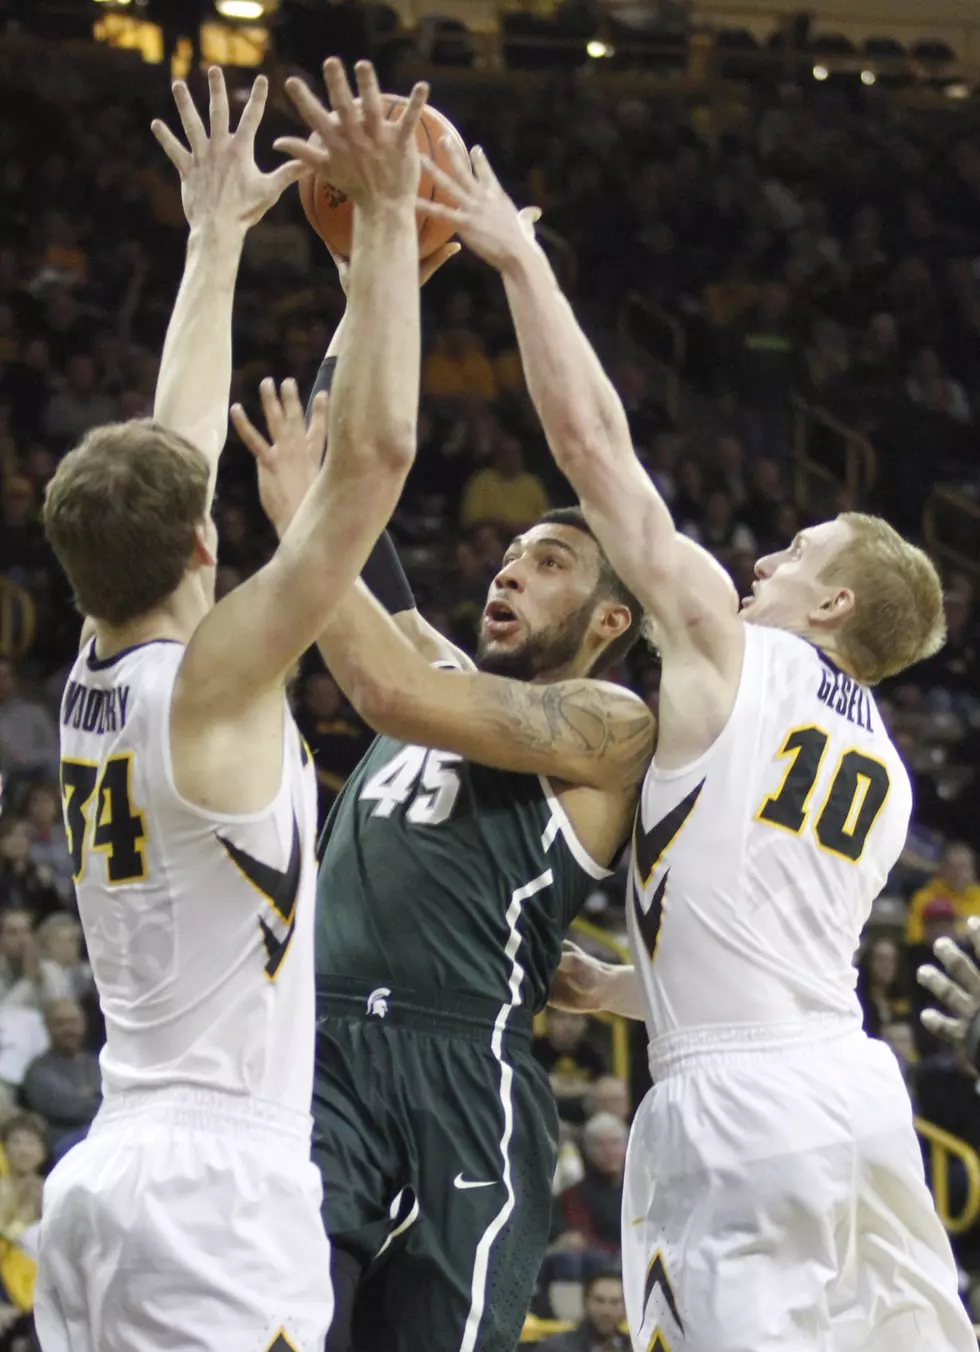 Trice Leads Second Half Rally, Spartans Cruise Past Hawkeyes